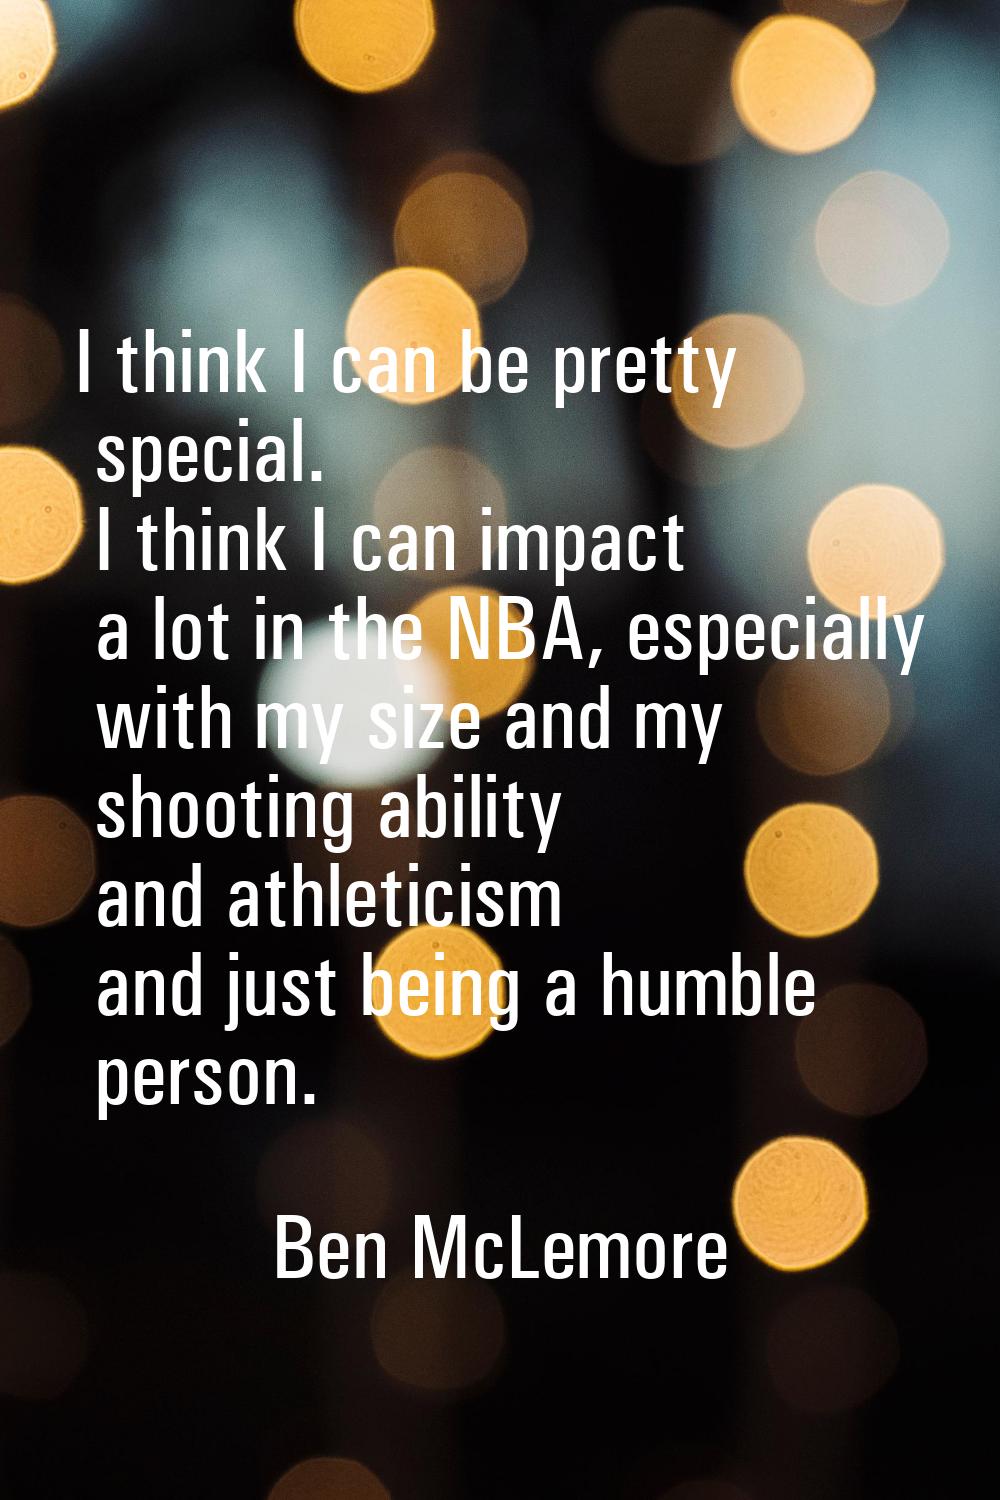 I think I can be pretty special. I think I can impact a lot in the NBA, especially with my size and